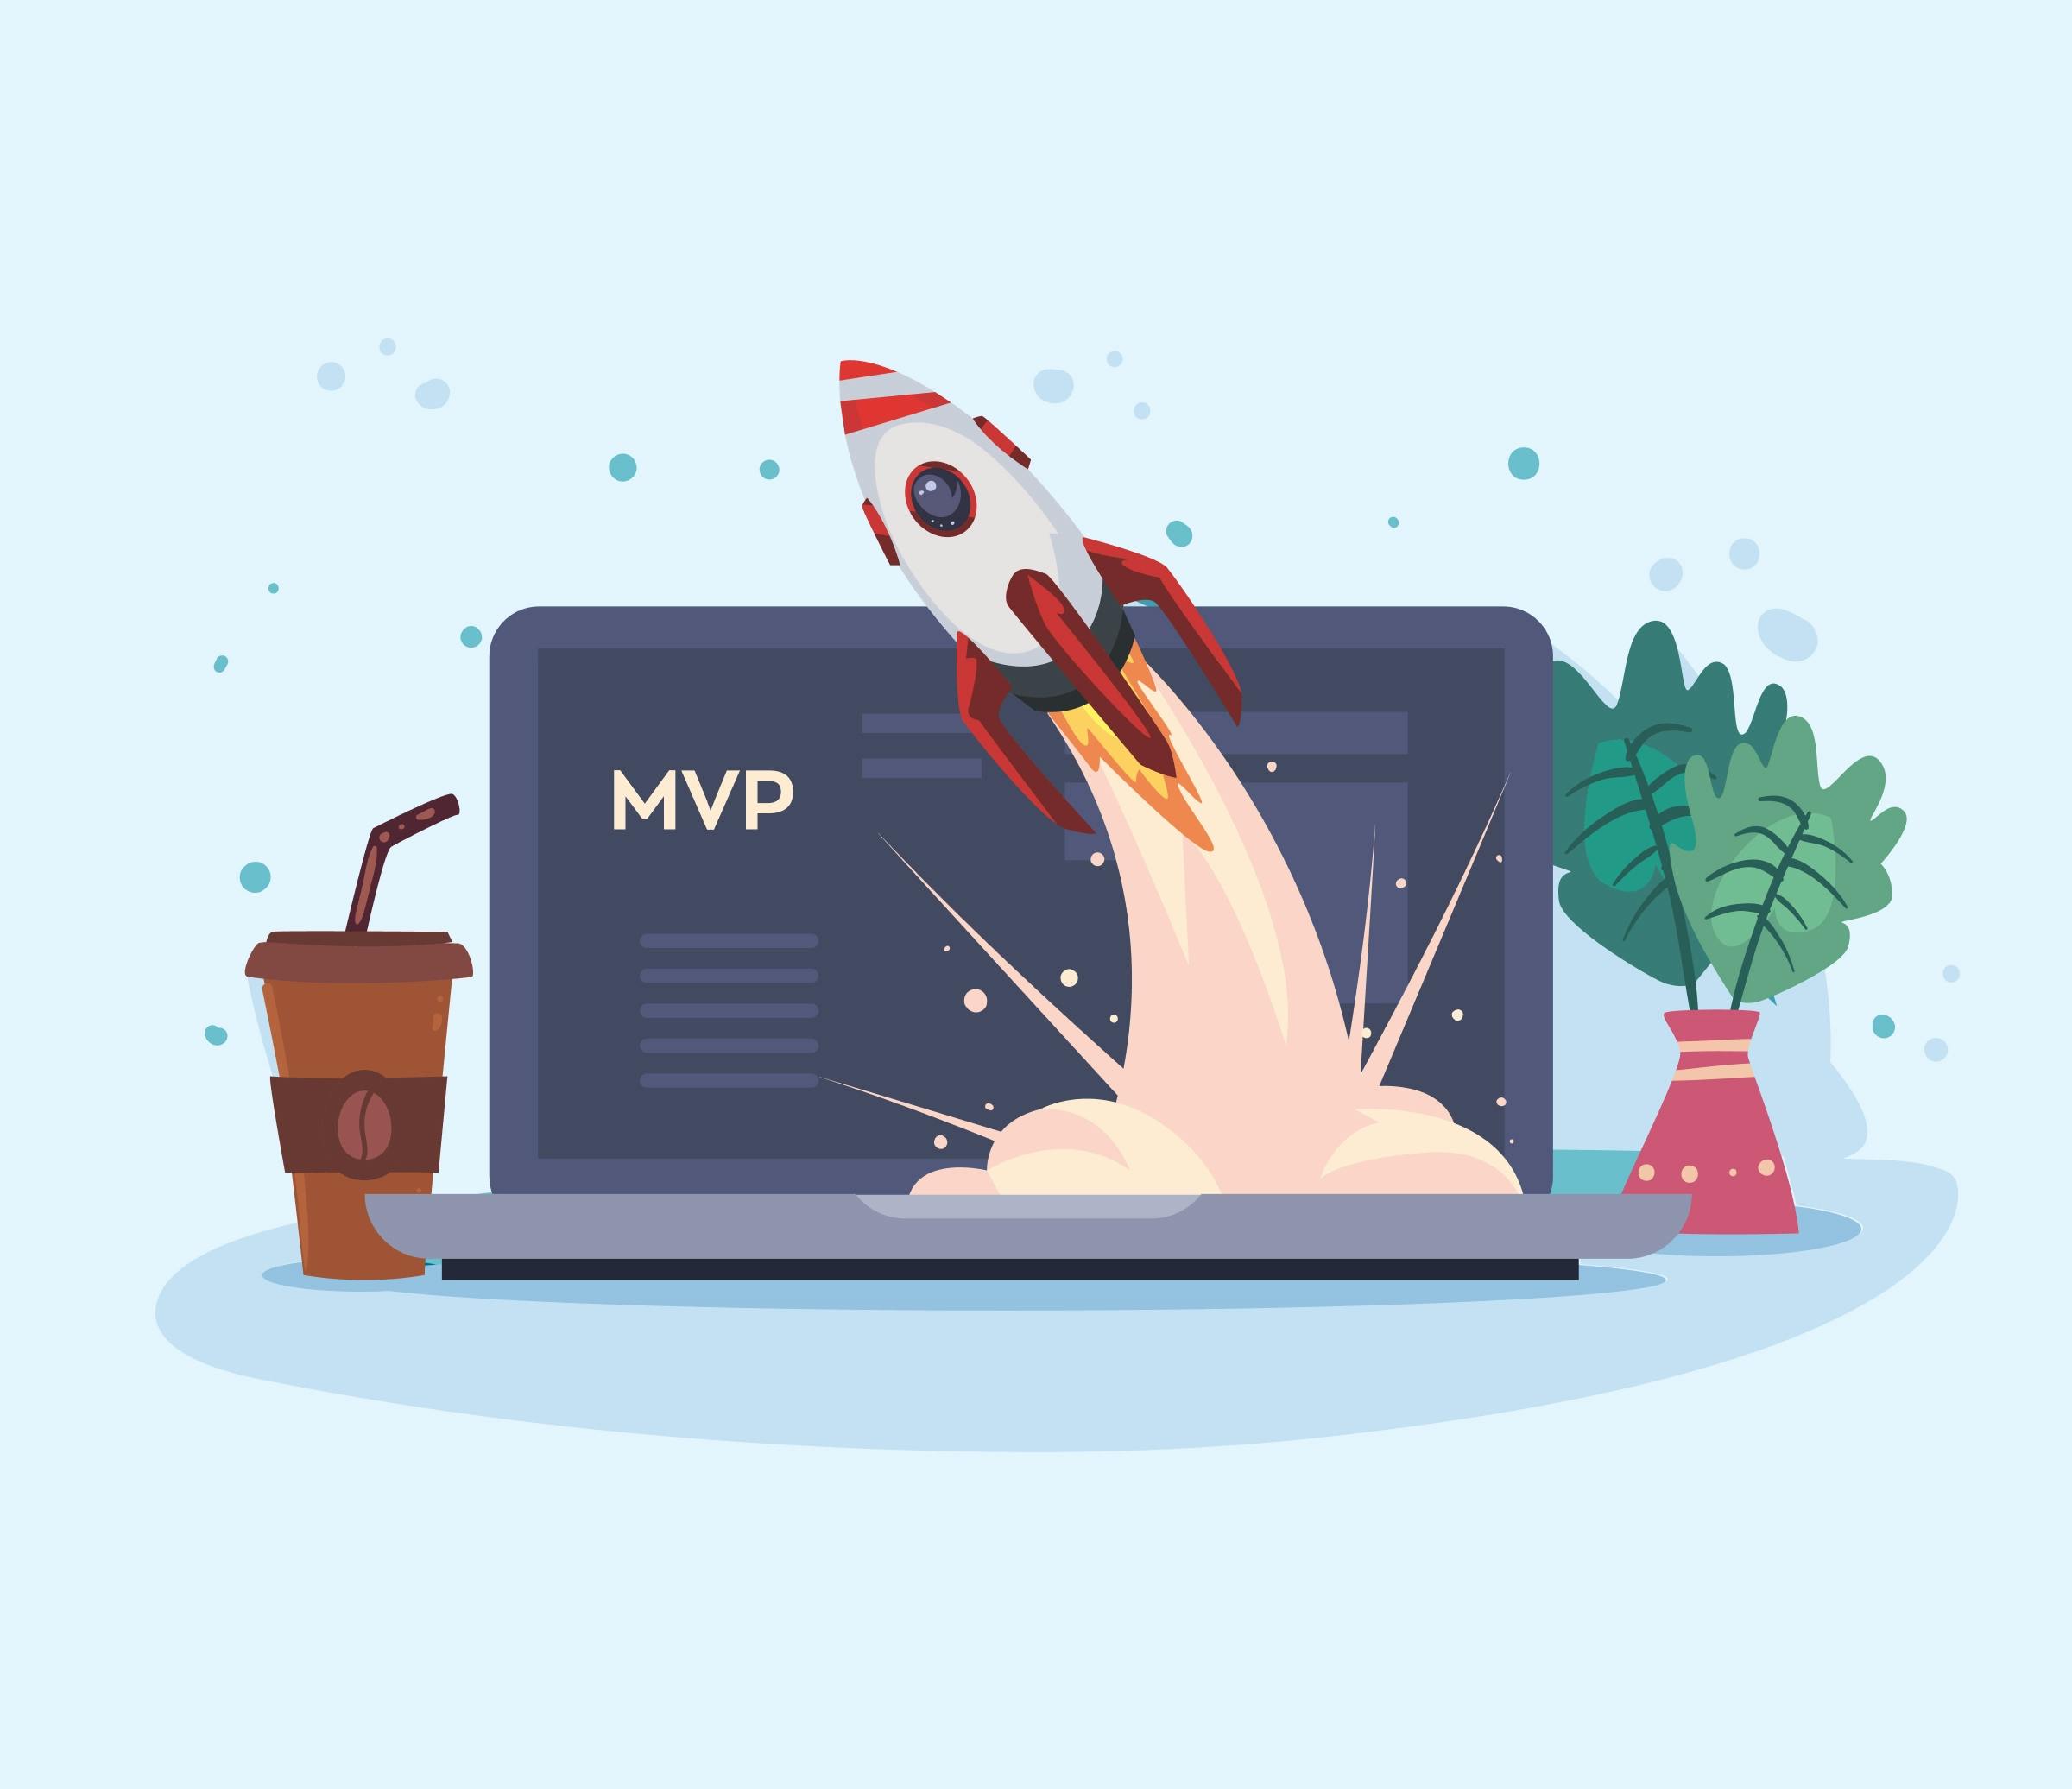 What is an MVP in software development